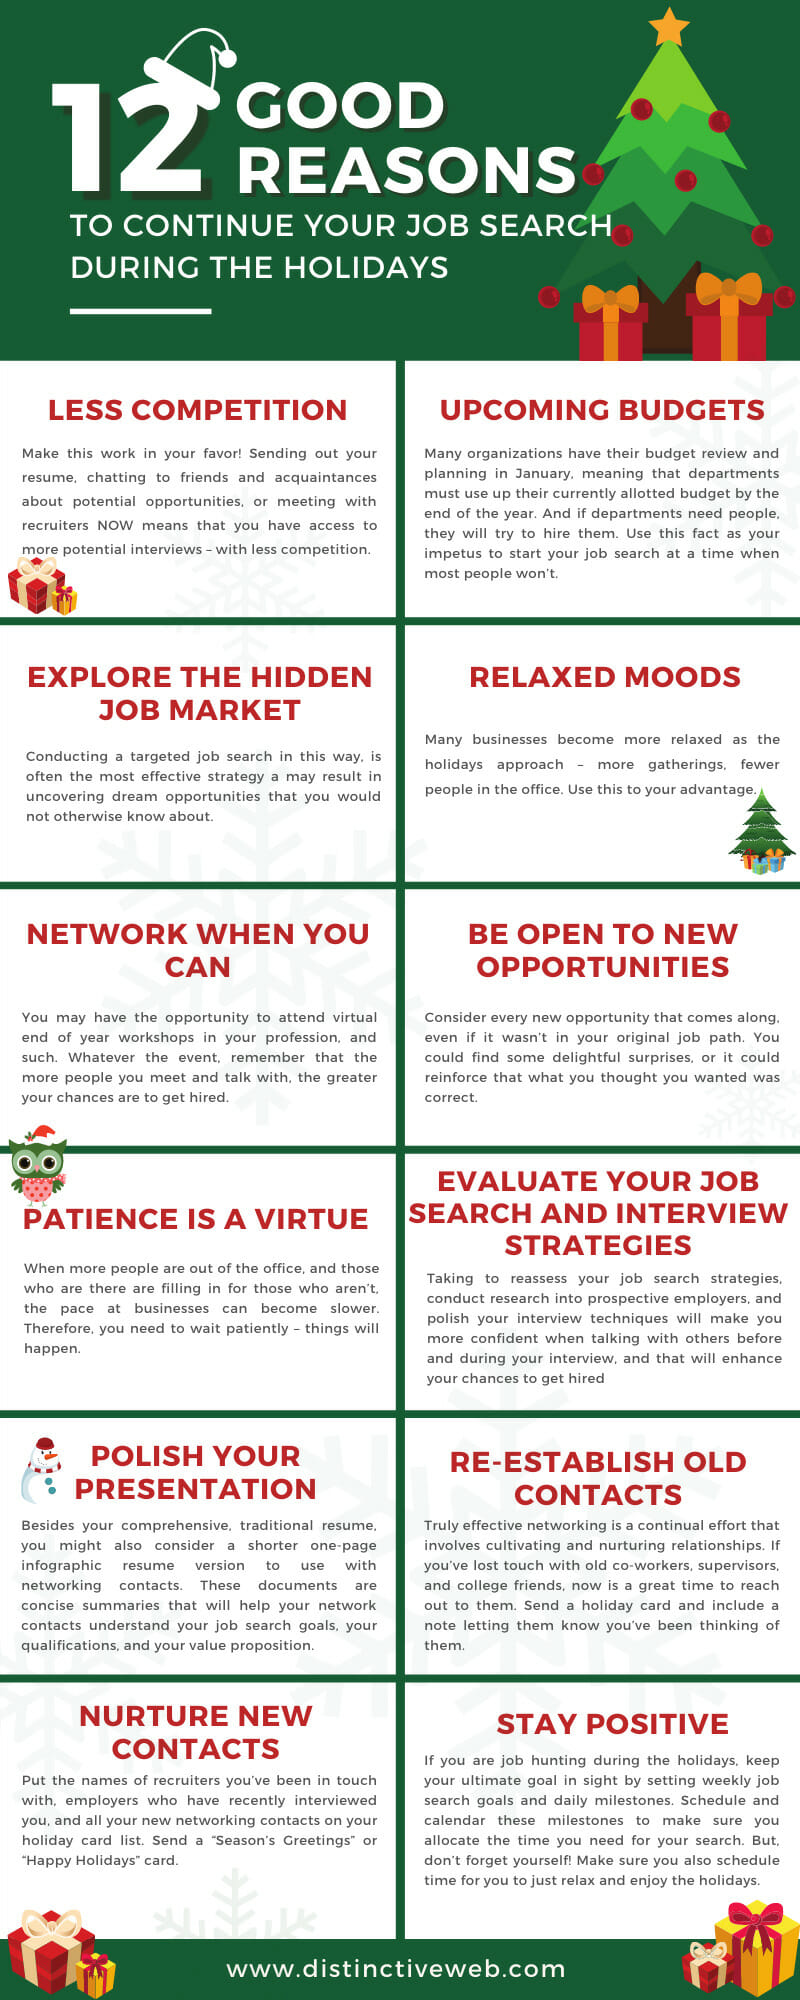 Reasons to Continue Job Searching During the Holiday Season